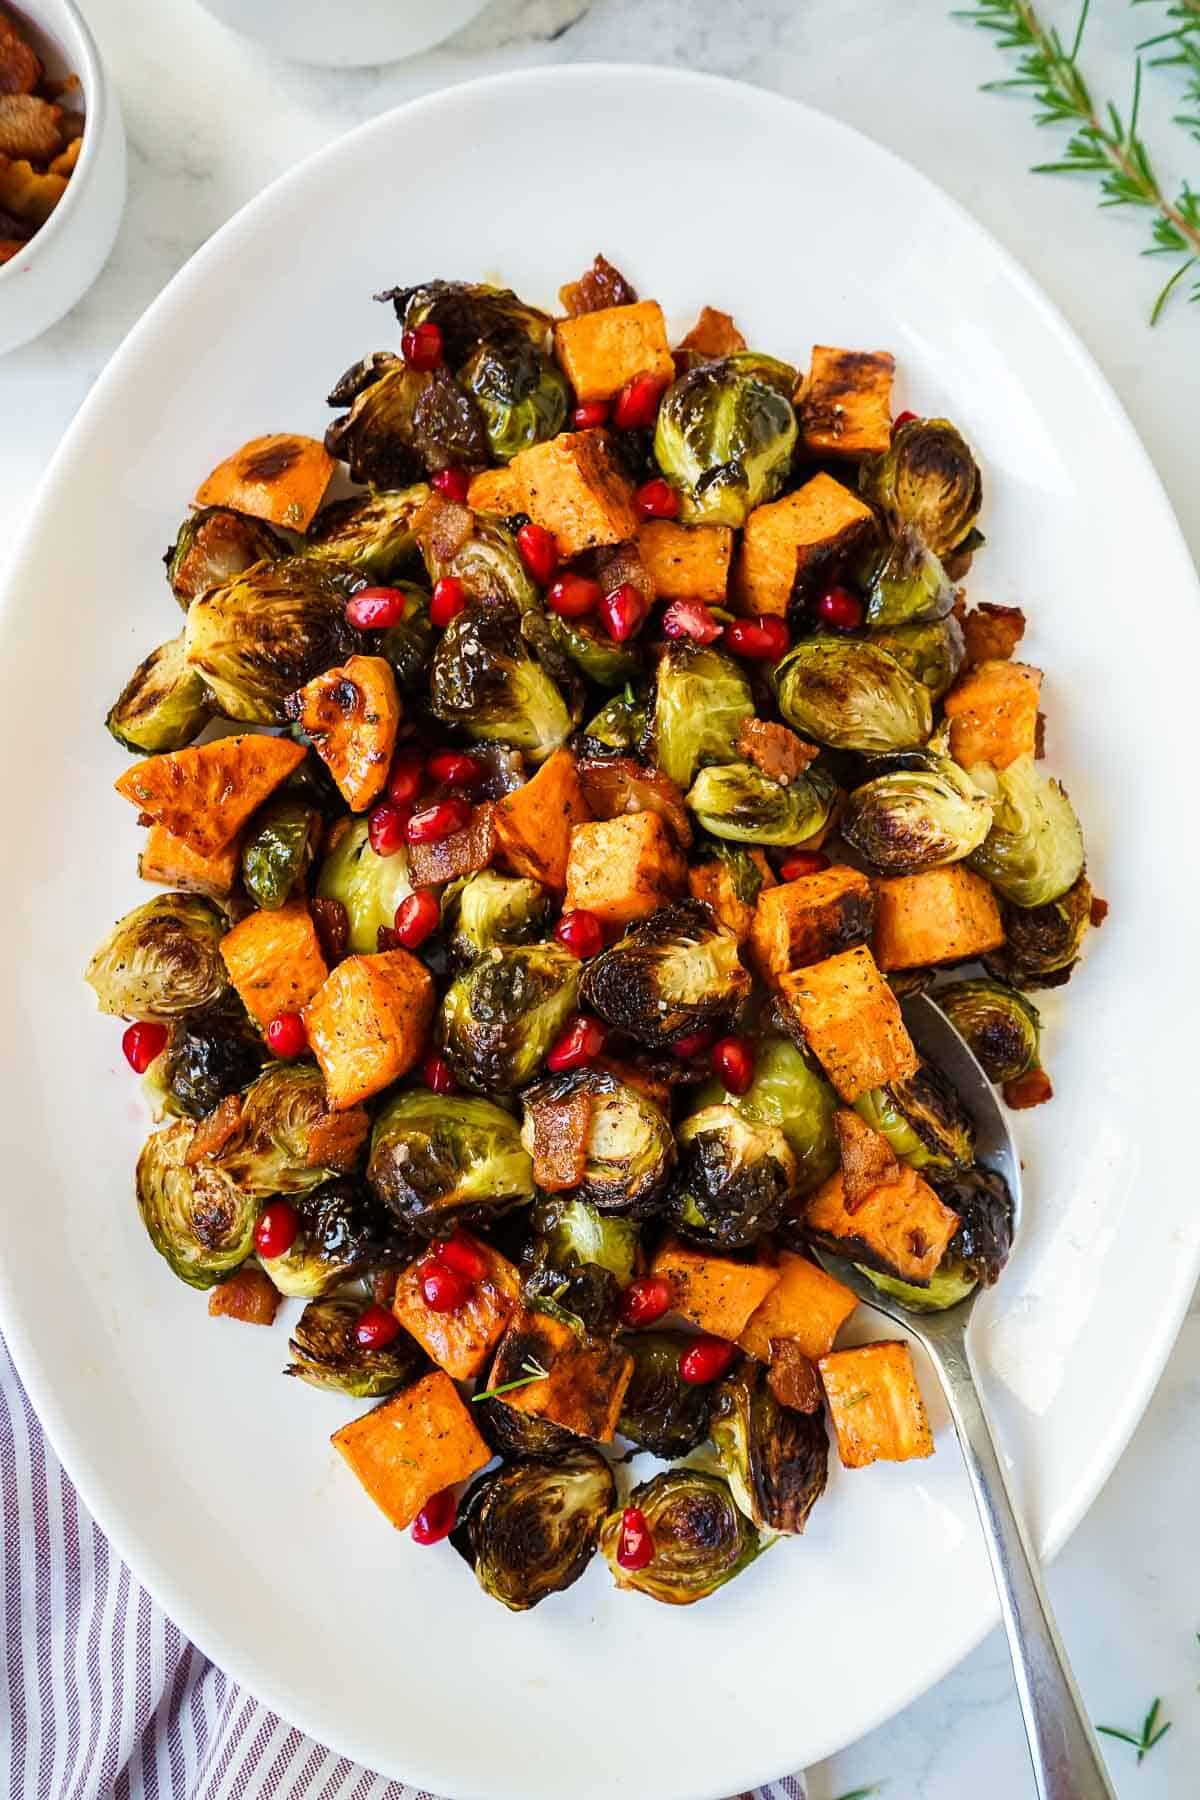 Roasted brussels sprouts and sweet potatoes on a white serving dish.